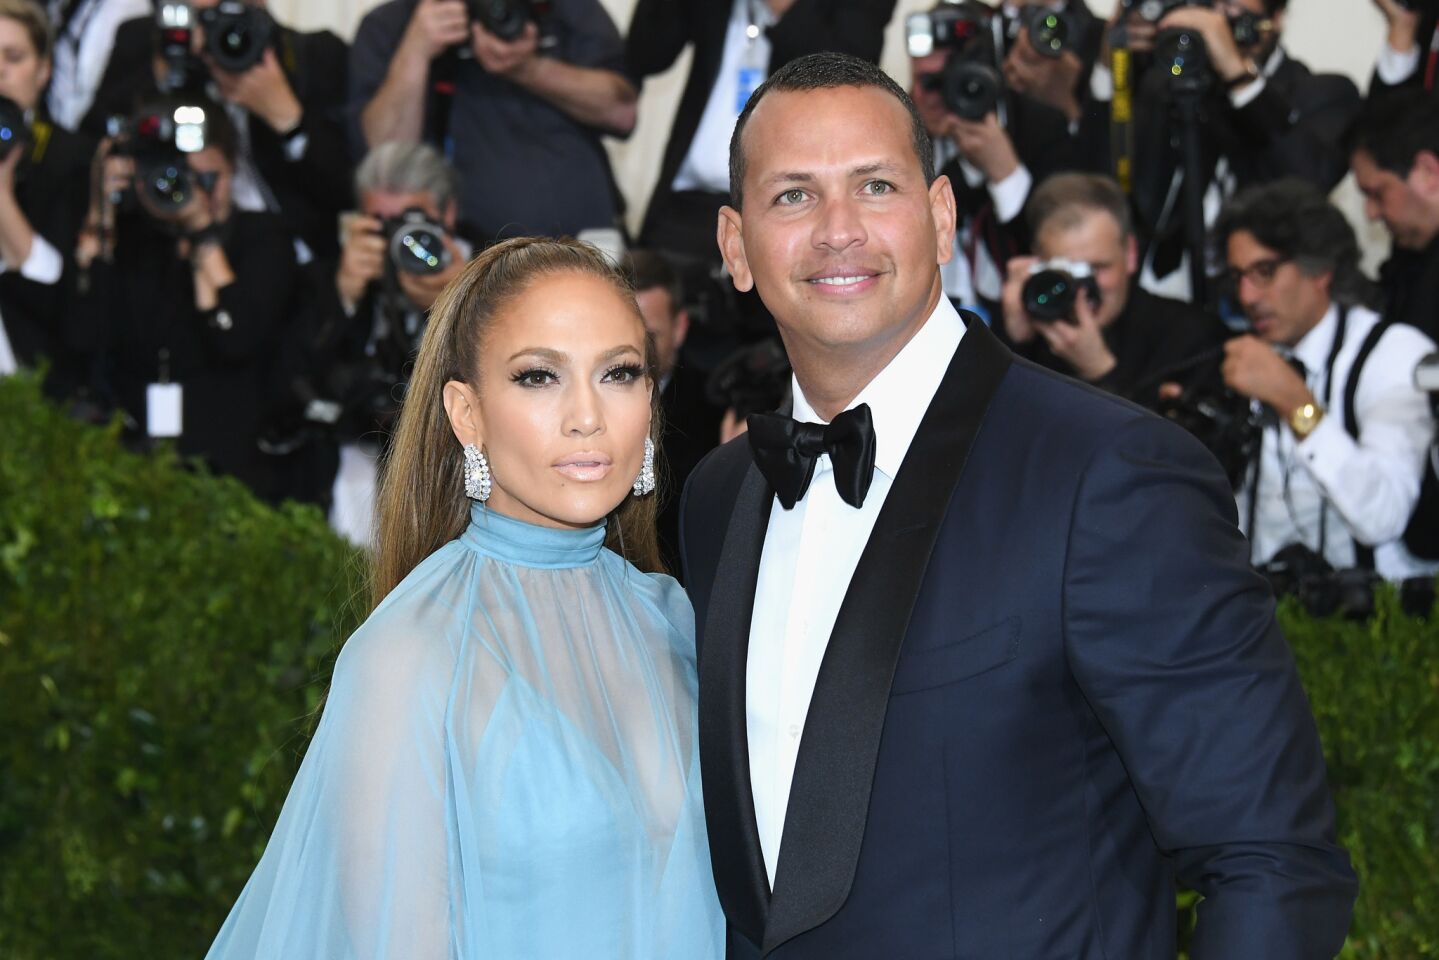 Jennifer Lopez and Alex Rodriguez take photos on the red carpet at the Met Gala.